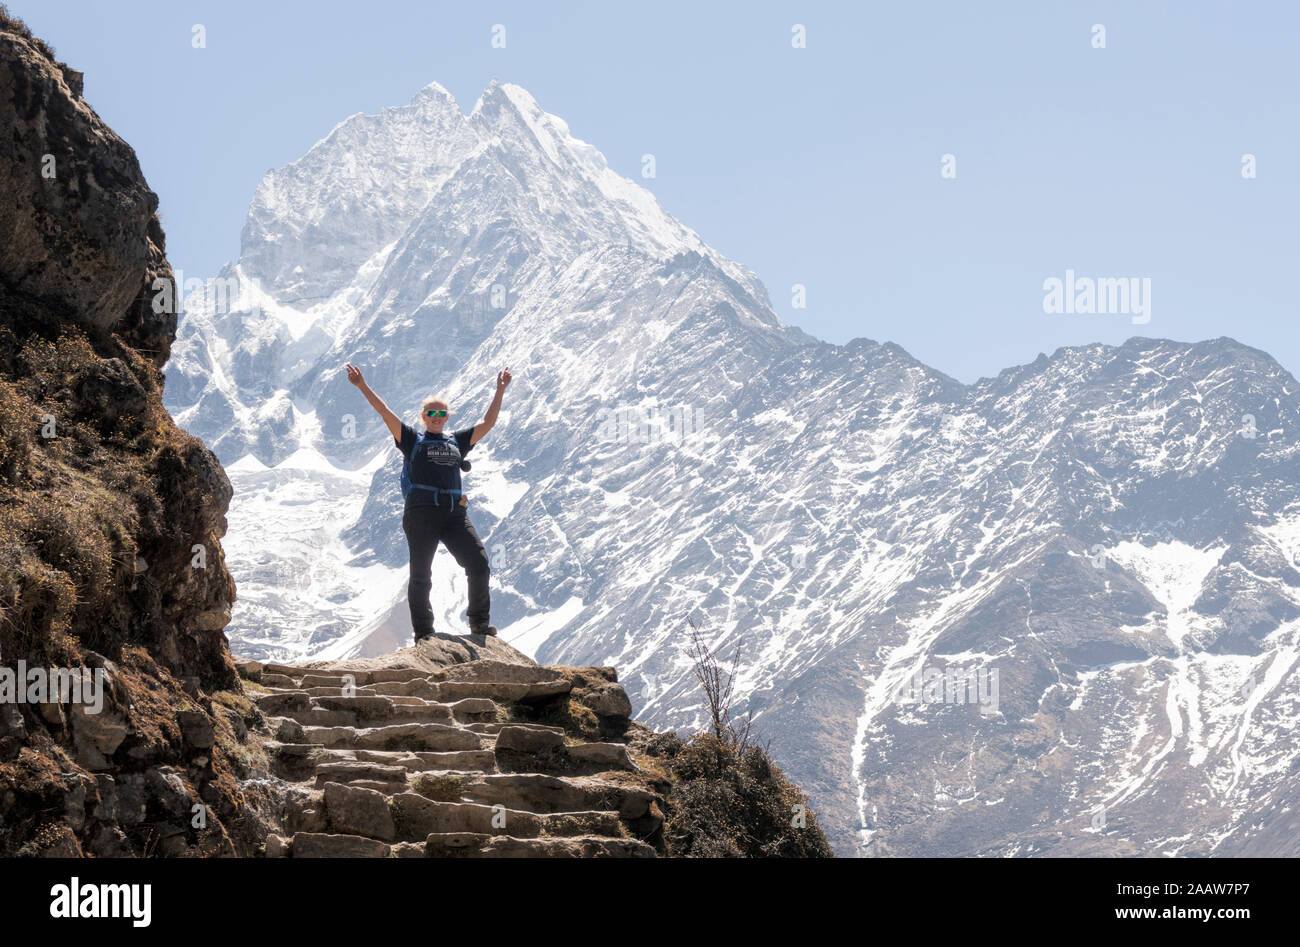 Happy woman raisng arms in front of Thamersku mountain, Himalayas, Solo Khumbu, Nepal Stock Photo